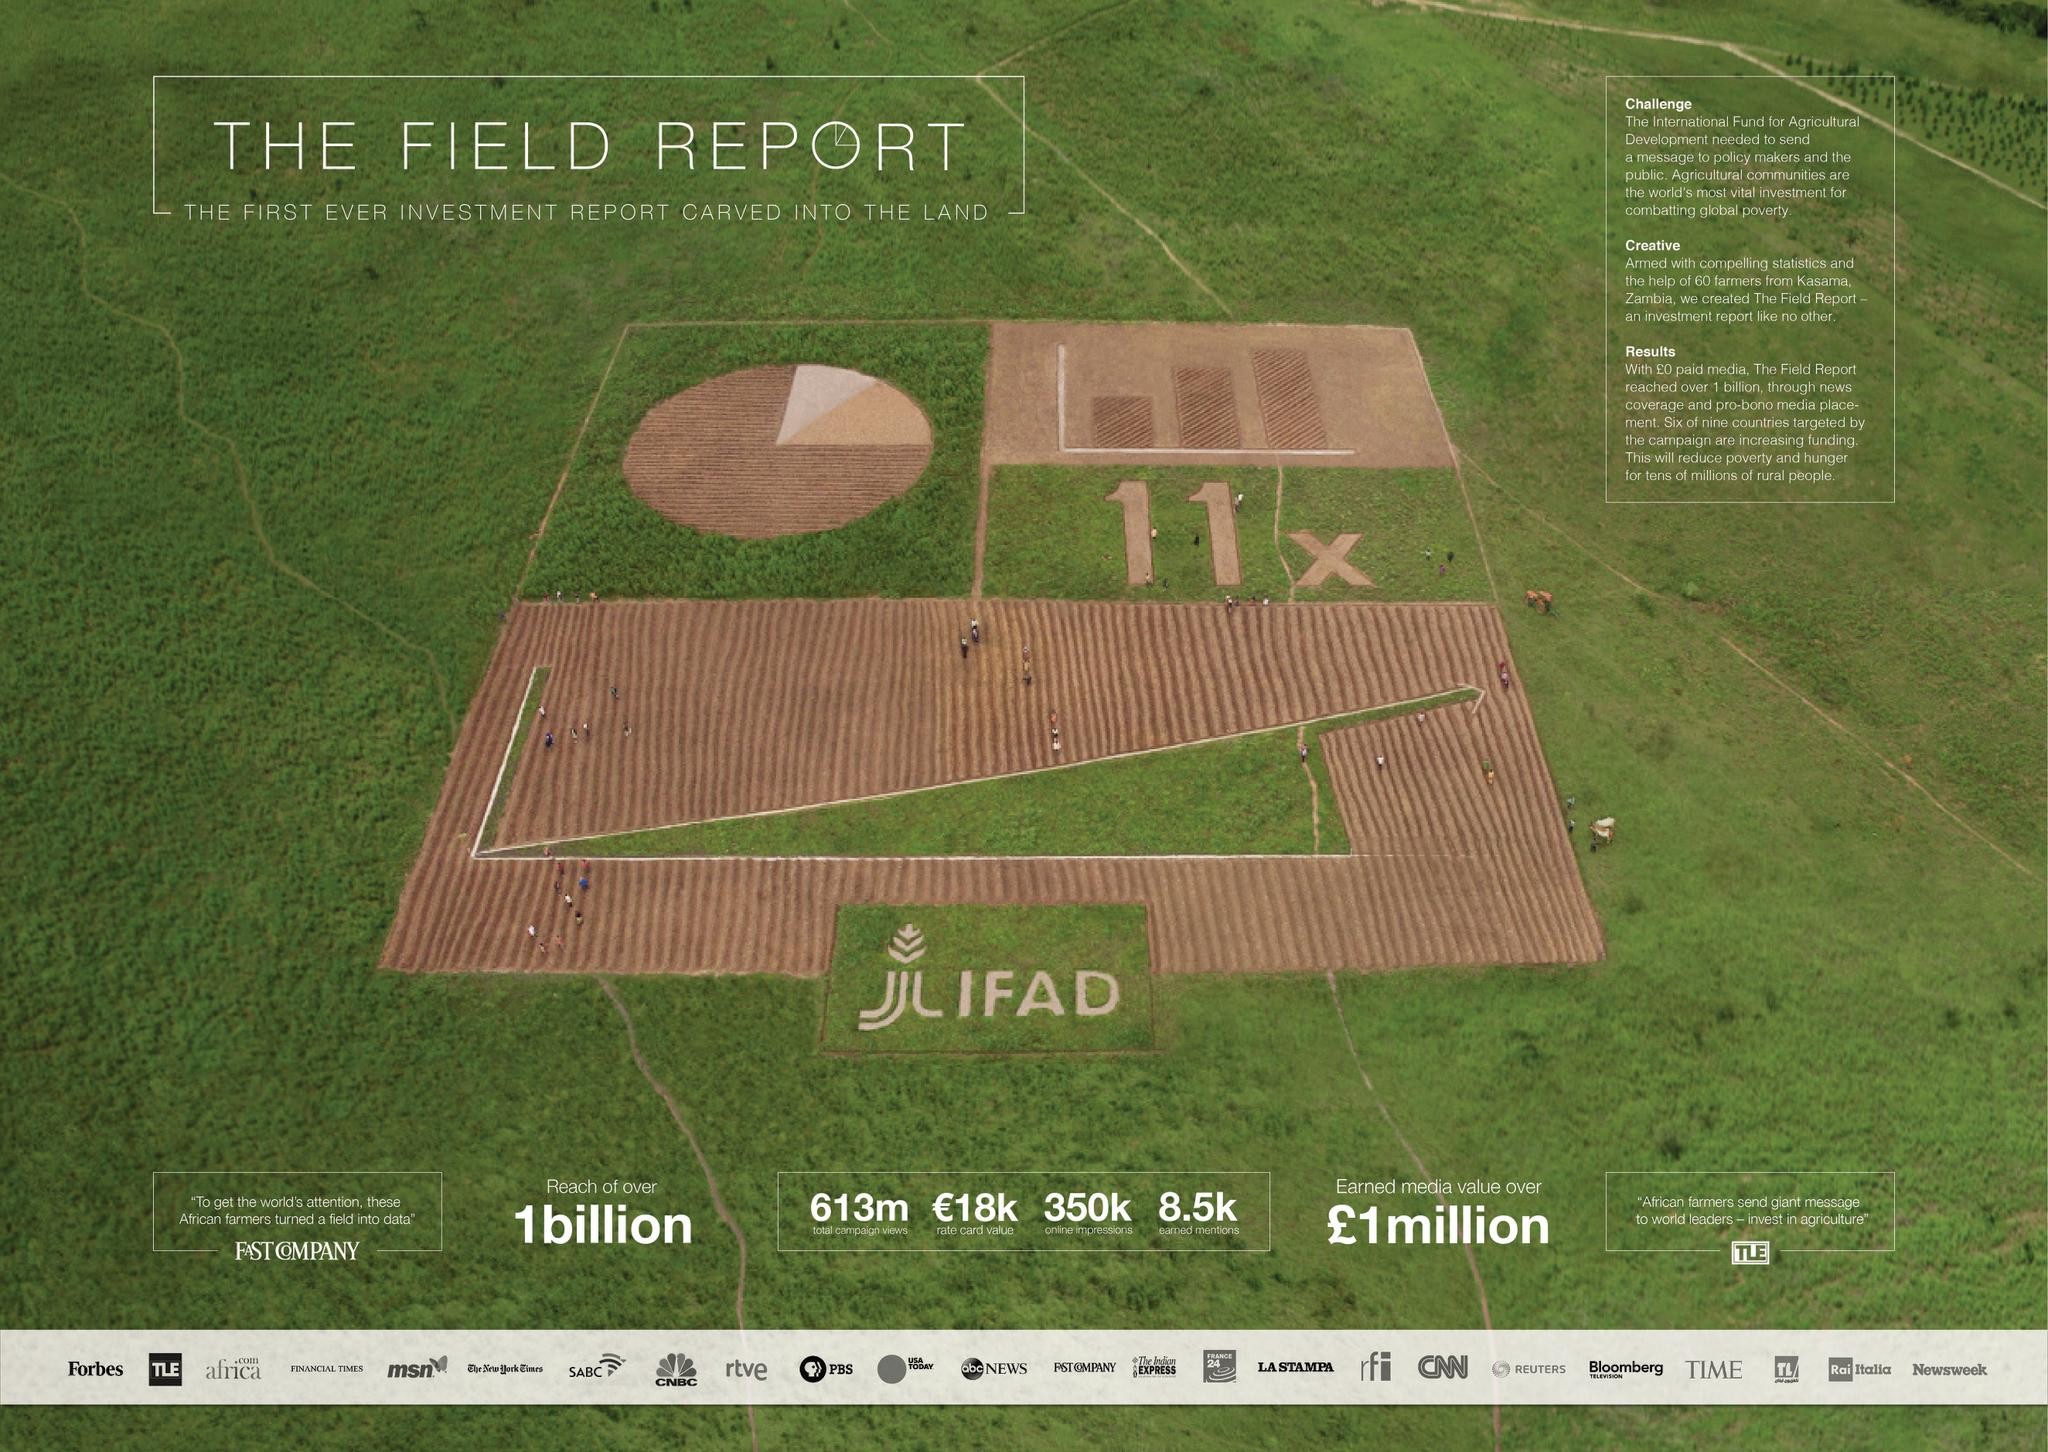 THE FIELD REPORT